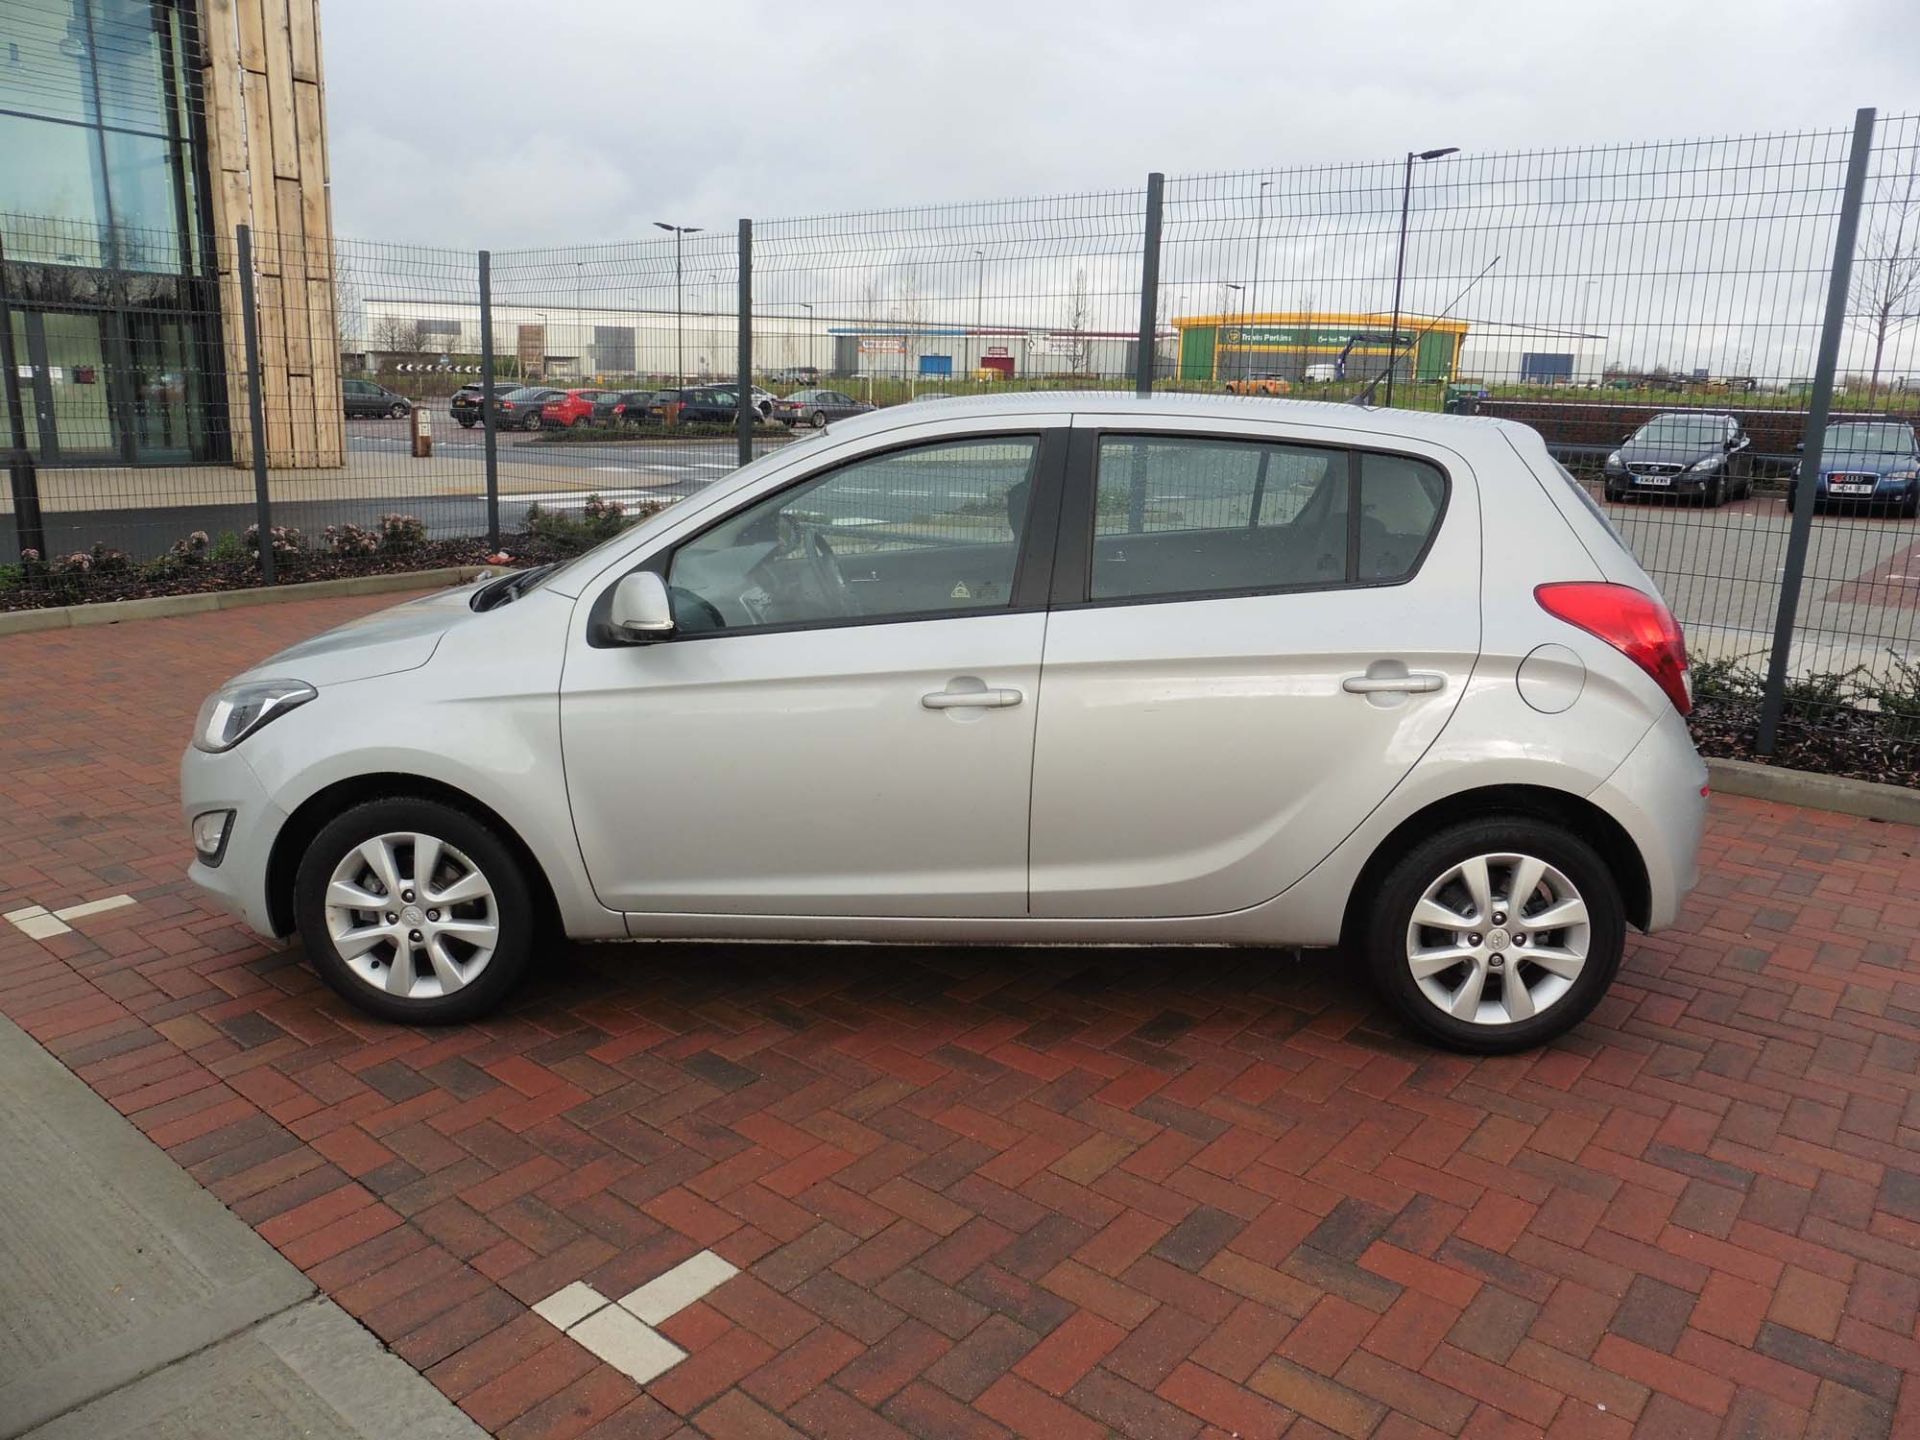 Hyundai i20 Active Auto 1396cc petrol hatchback Registration number: YM63 GBY First Registered: 07. - Image 3 of 9